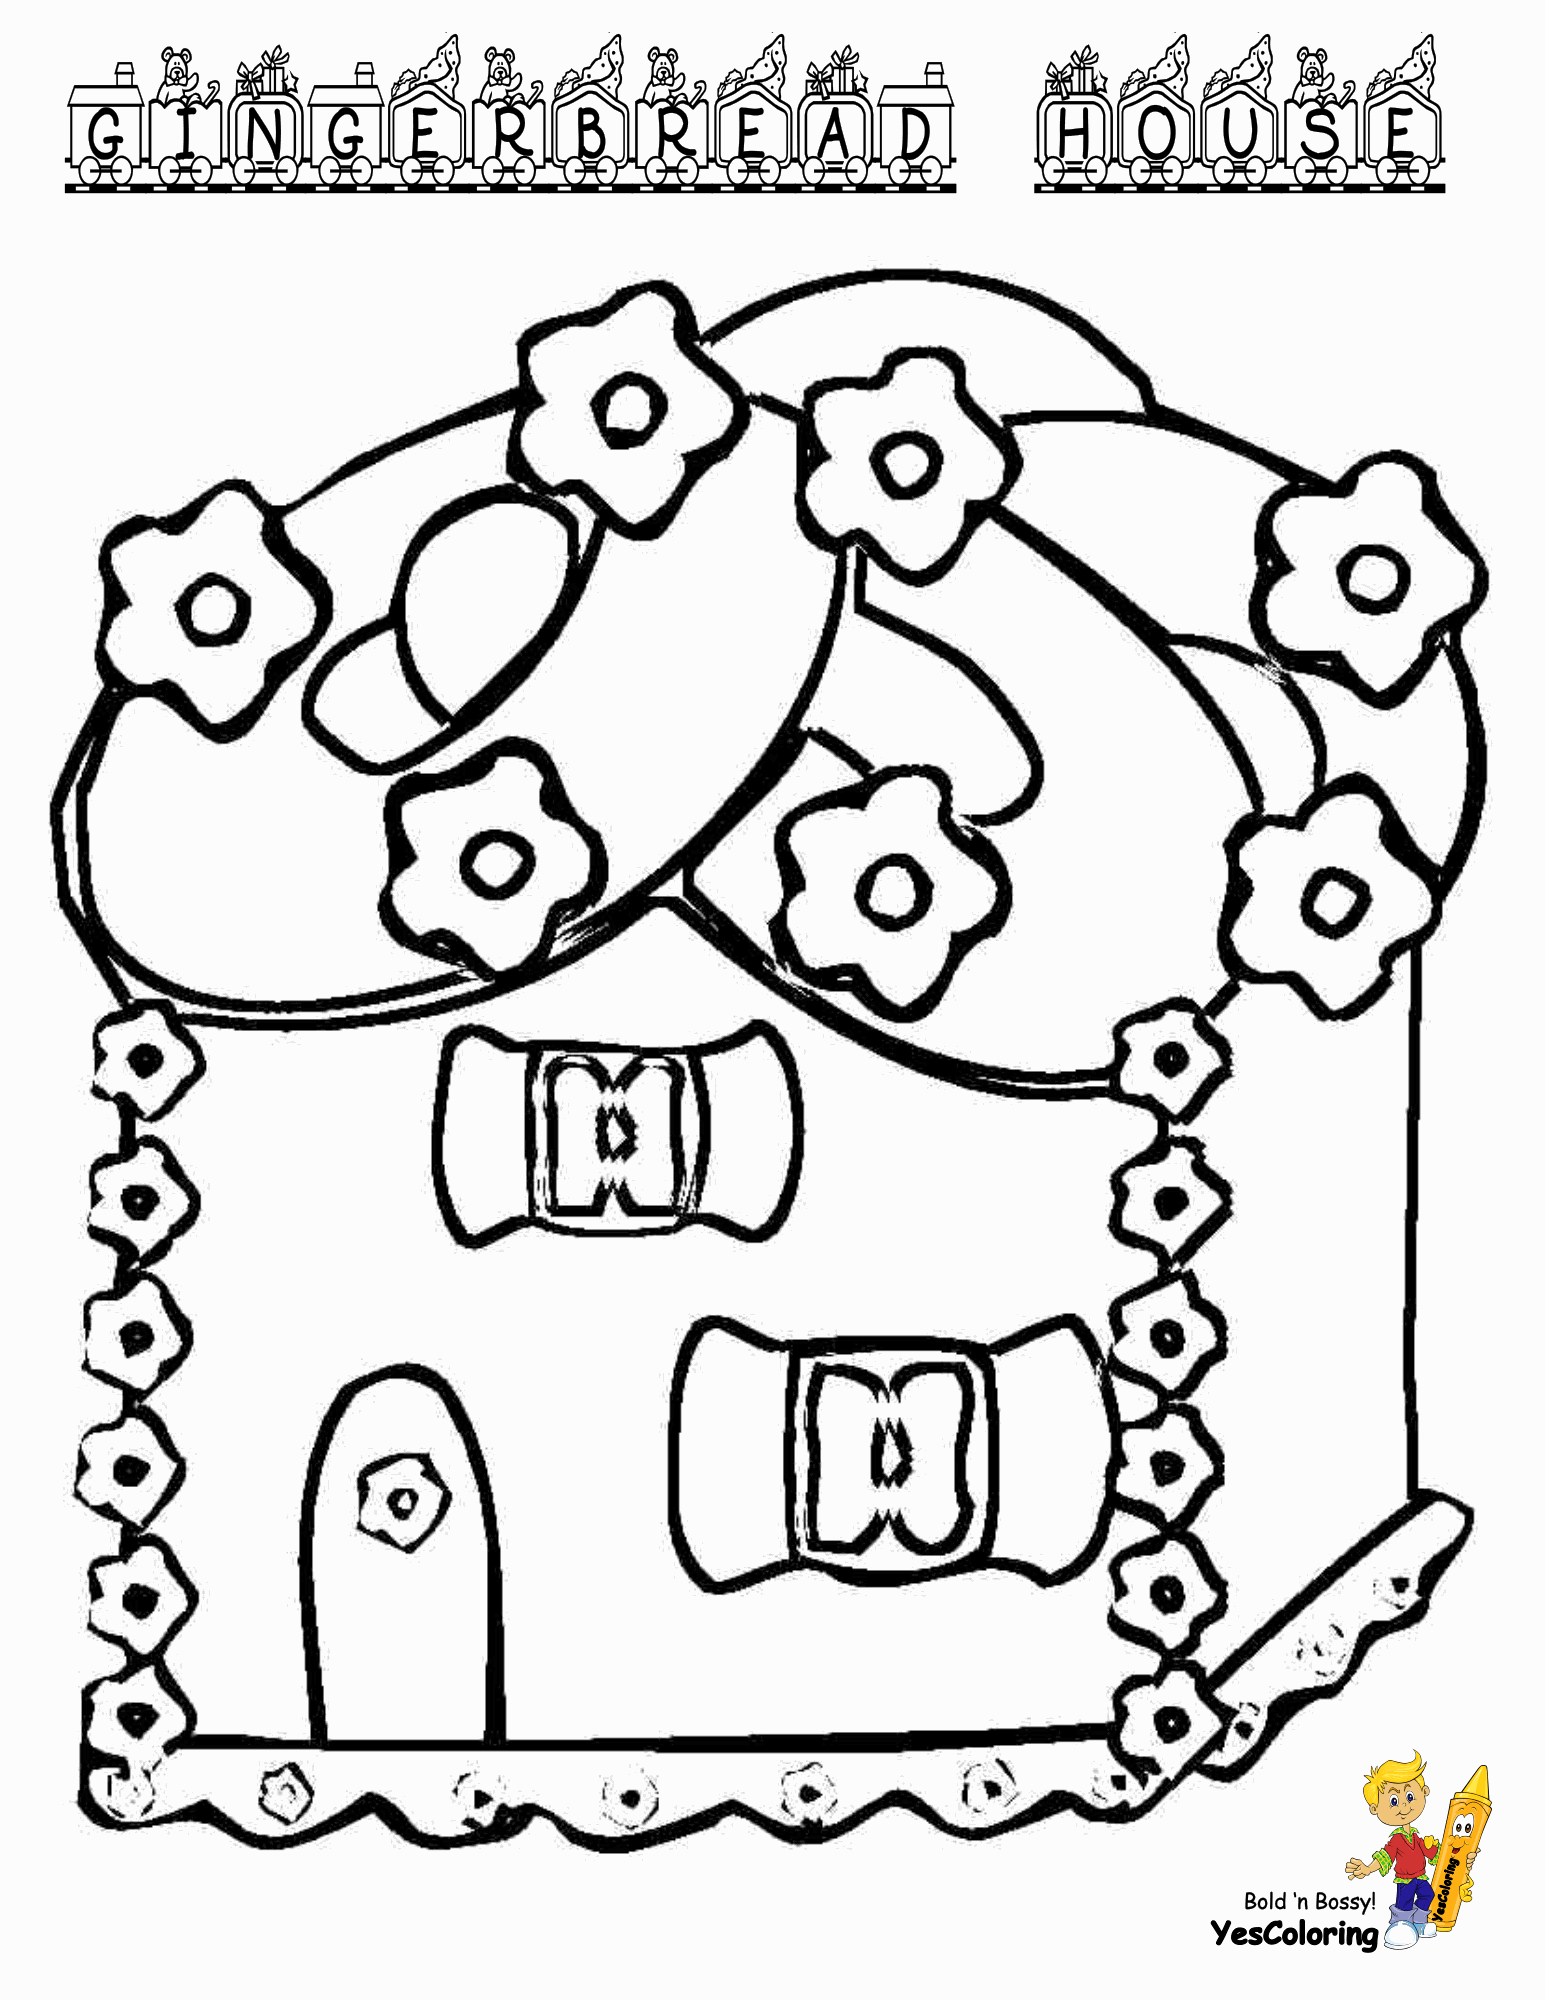 gingerbread girl coloring page gingerbread man coloring page  print color fun! coloring page gingerbread girl